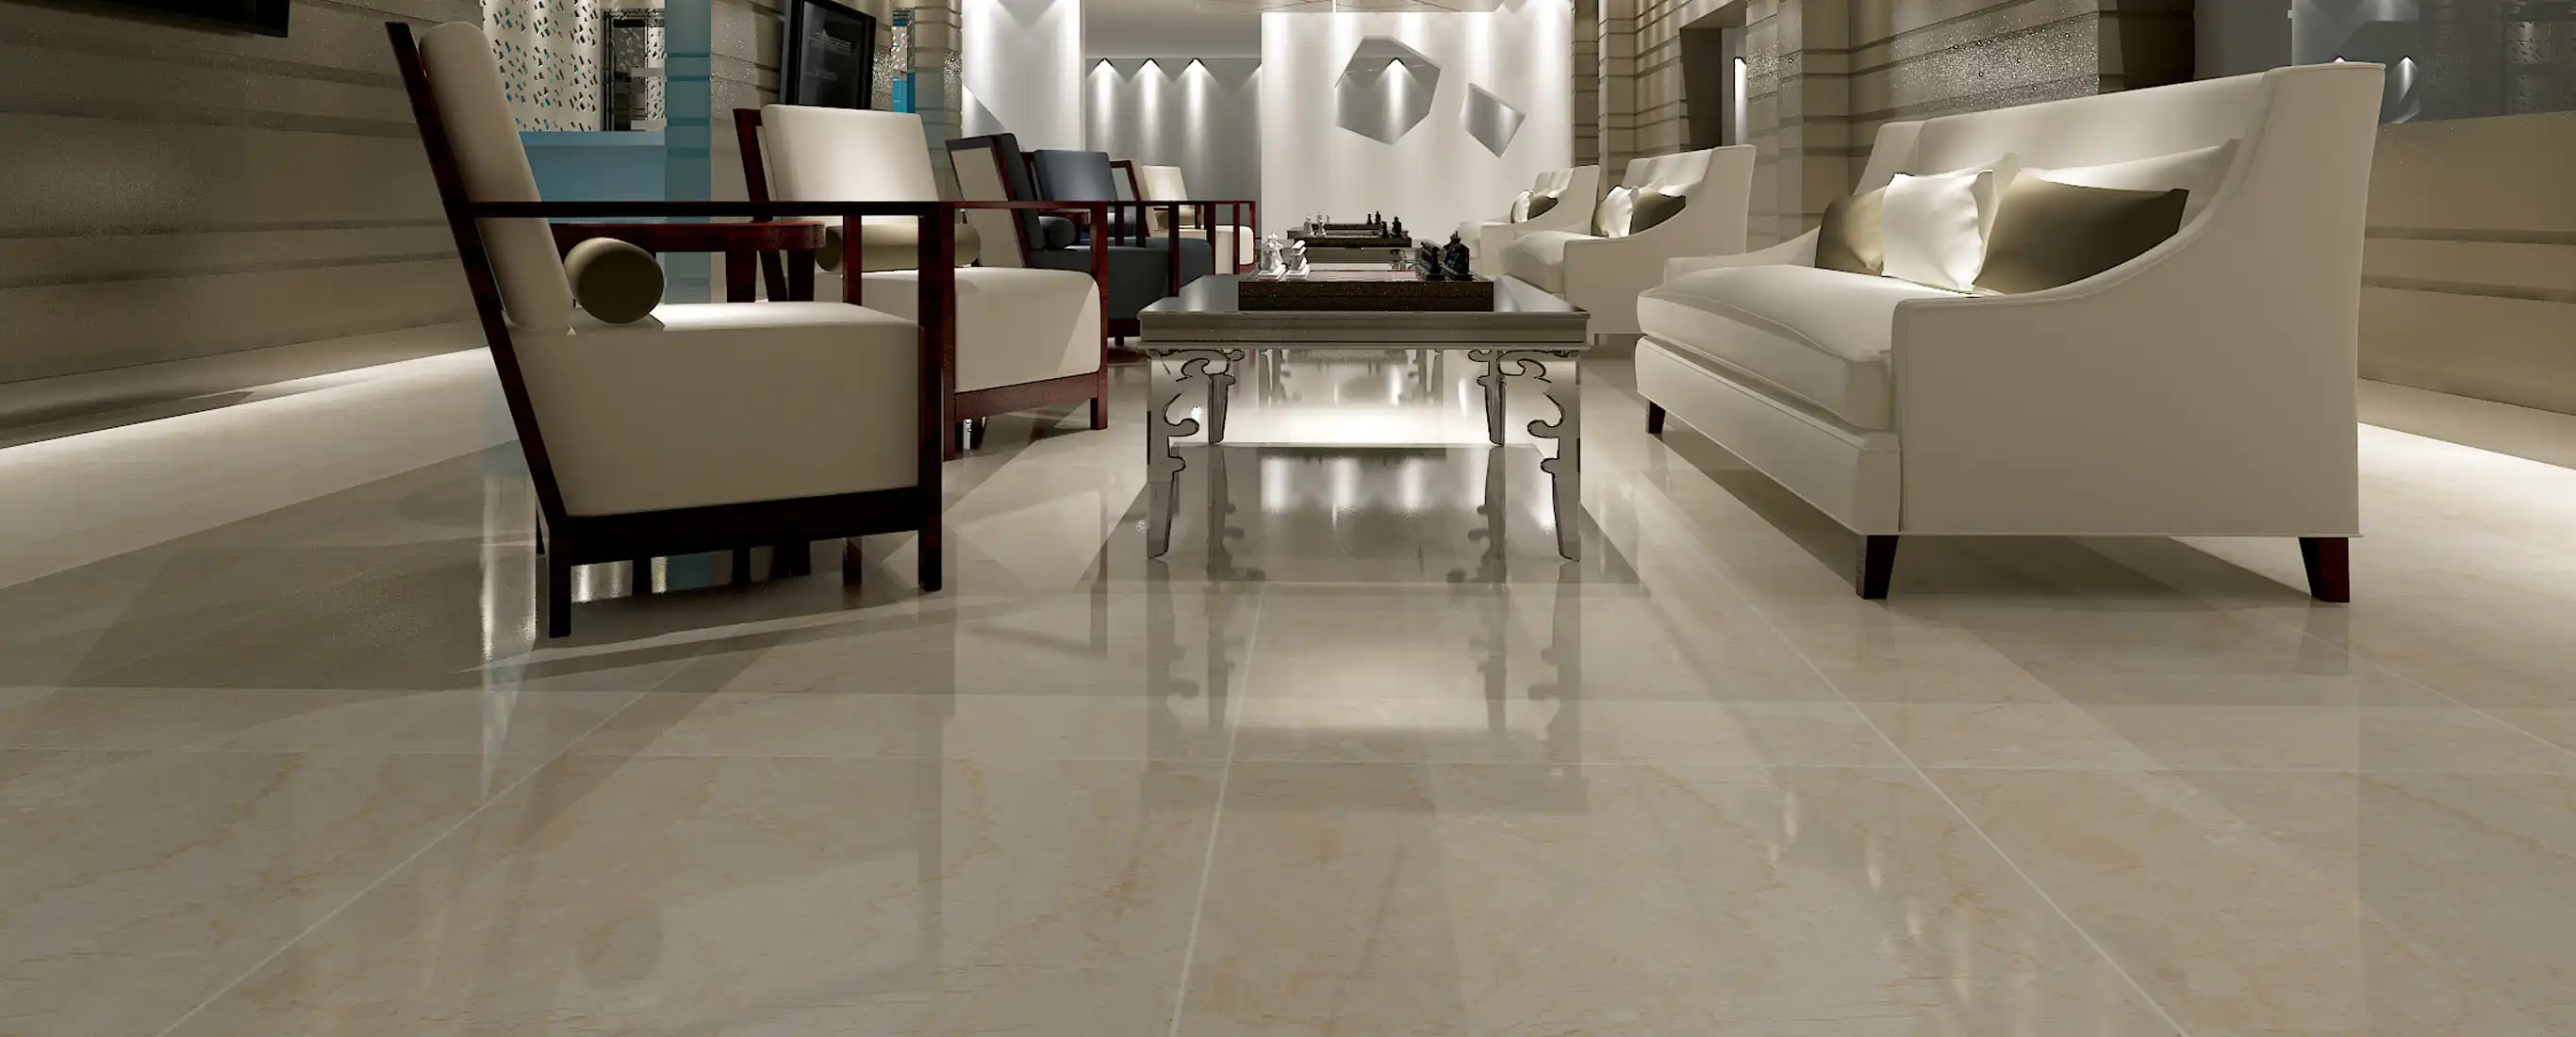 Floor Tiles Guide: Tiling Ideas for Your Room